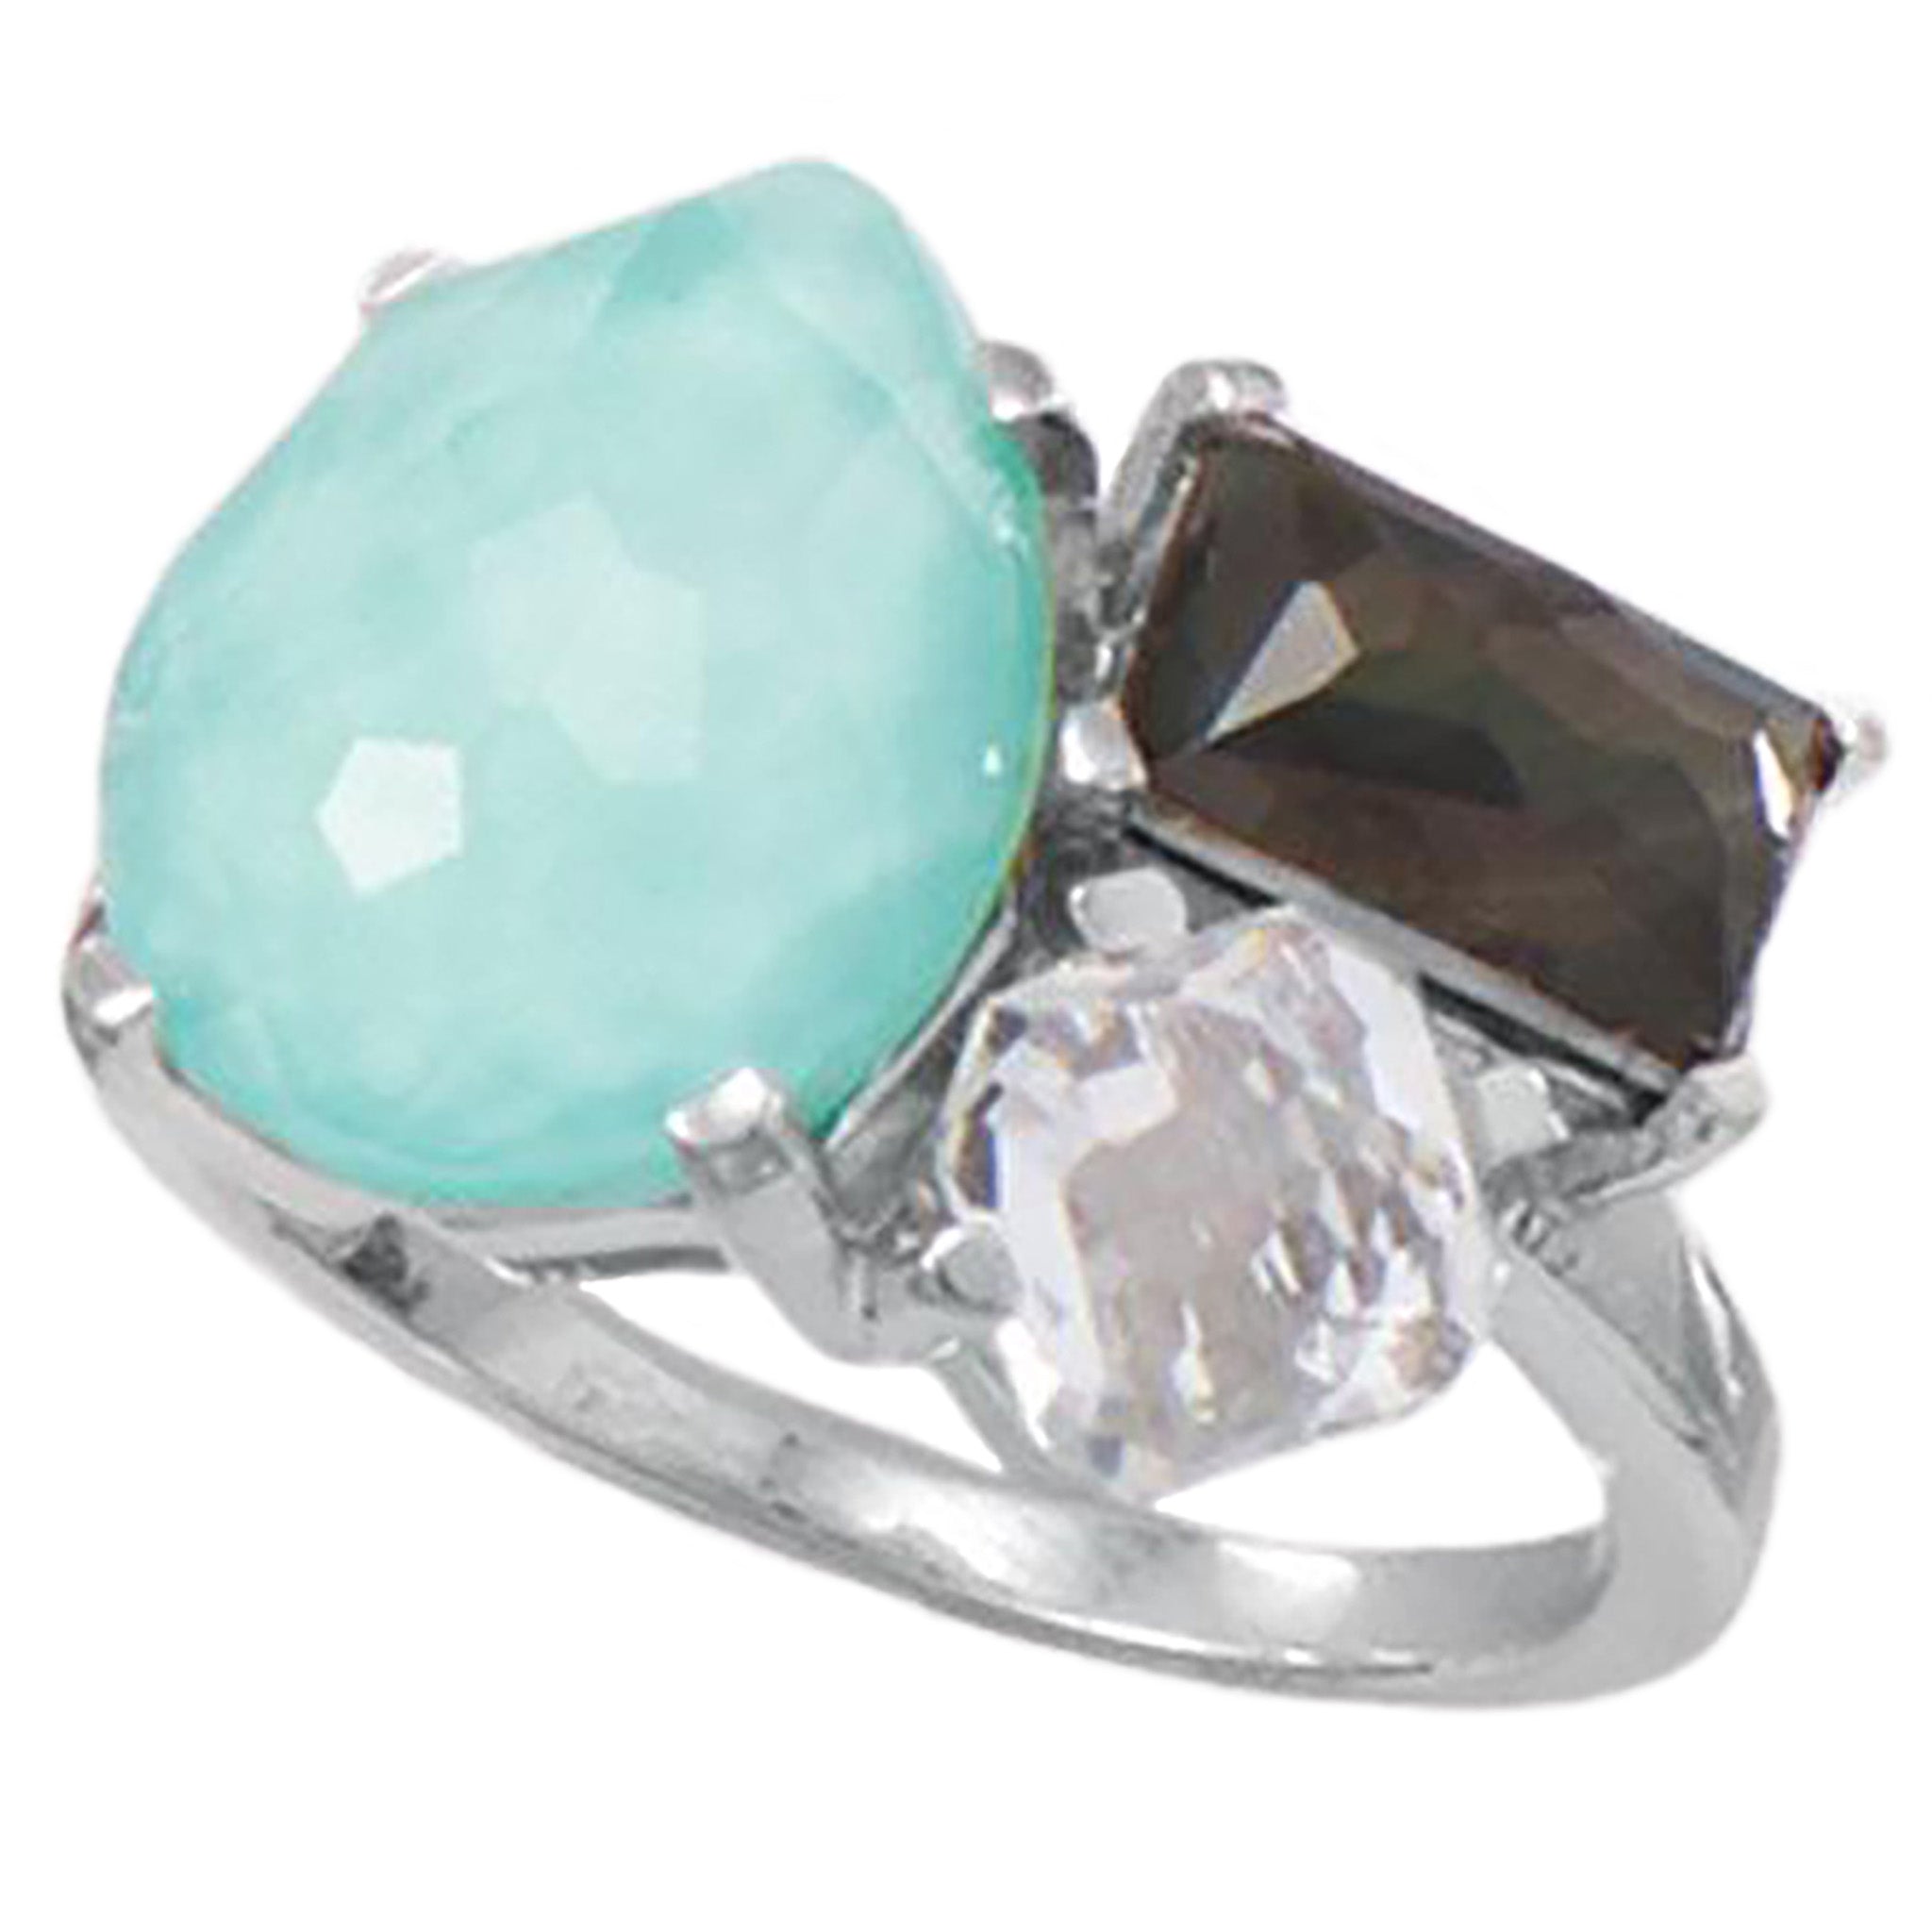 Turquoise and Quartz Doublet Ring